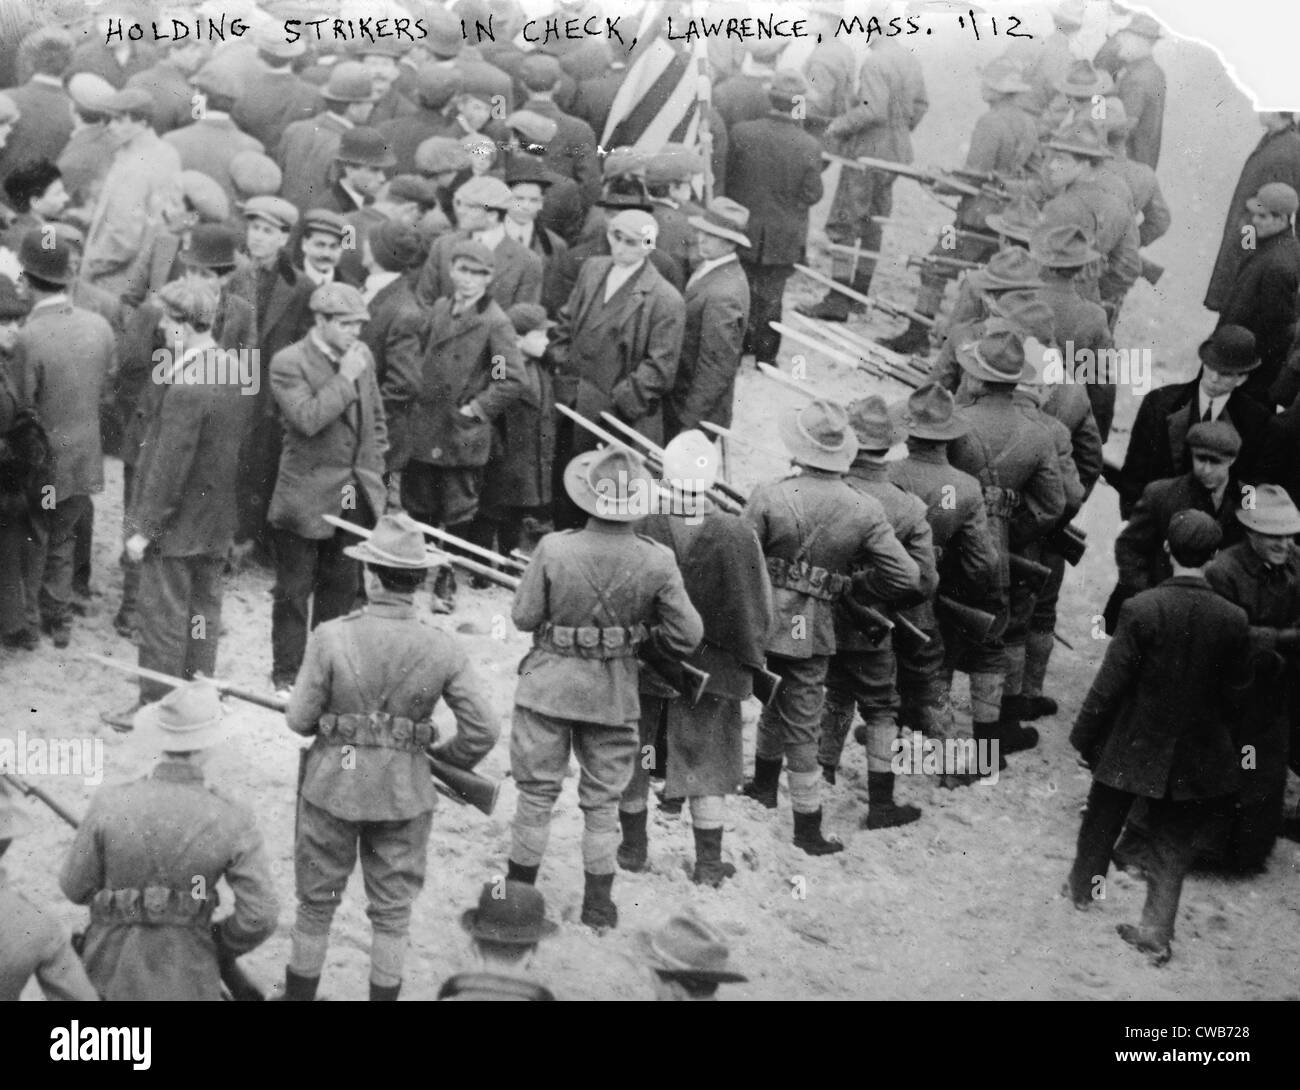 Lawrence Textile Strike. Massachusetts militiamen with fixed bayonets surround a parade of strikers, Lawrence, Mass. January, Stock Photo